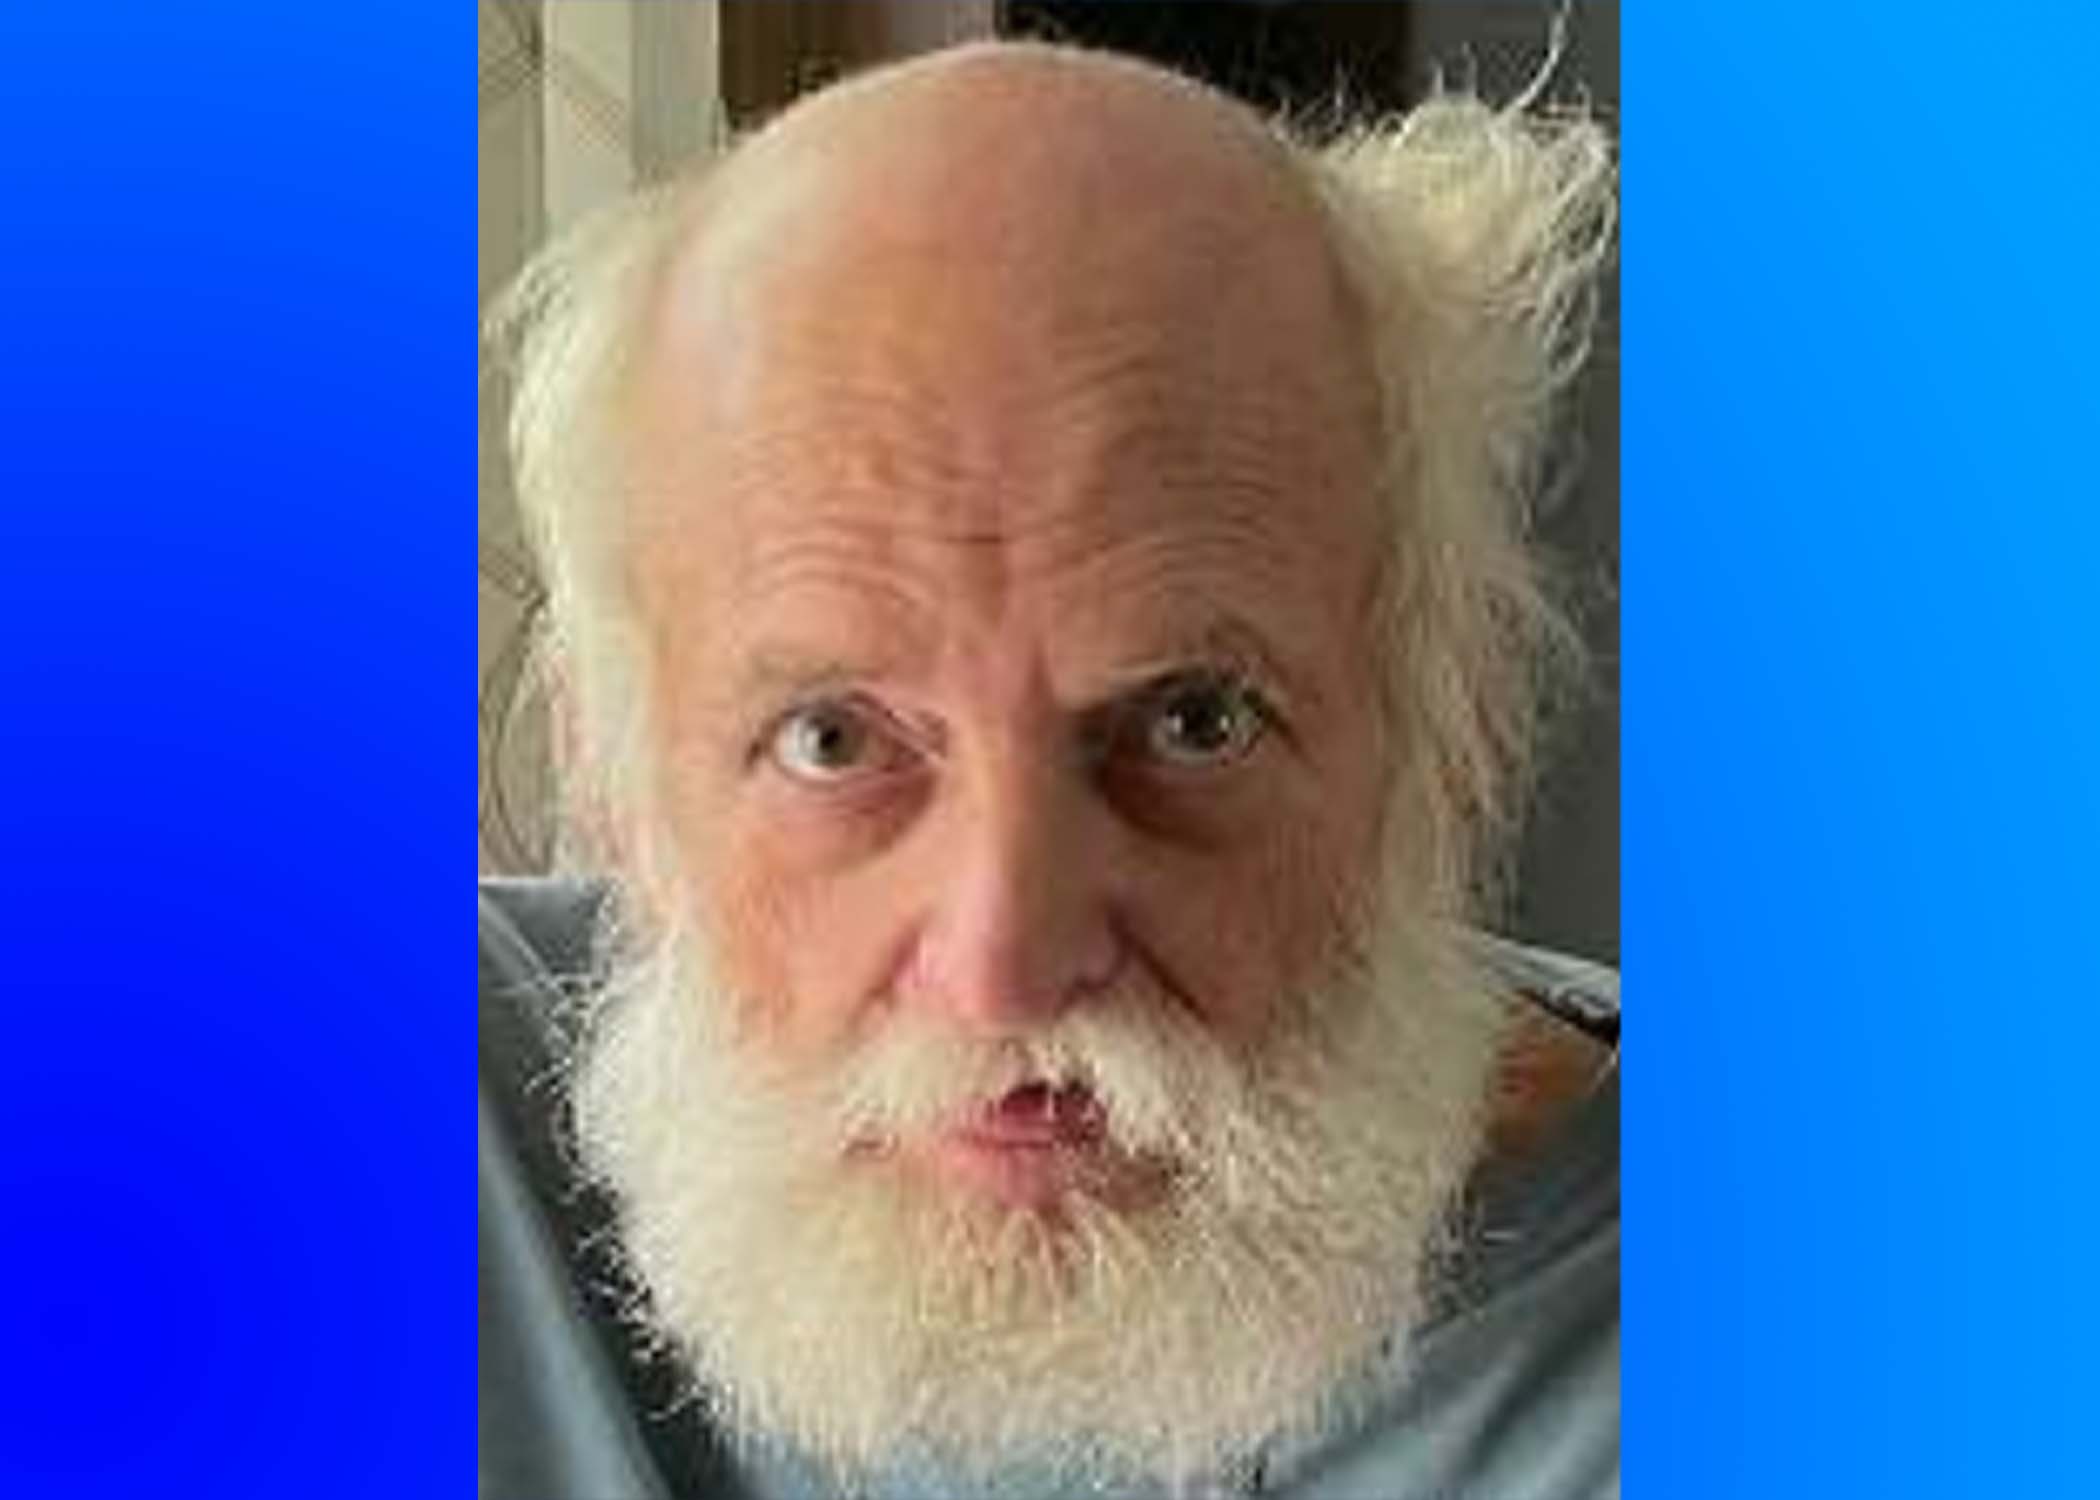 Missing and Endangered Person Alert issued for Montgomery County man